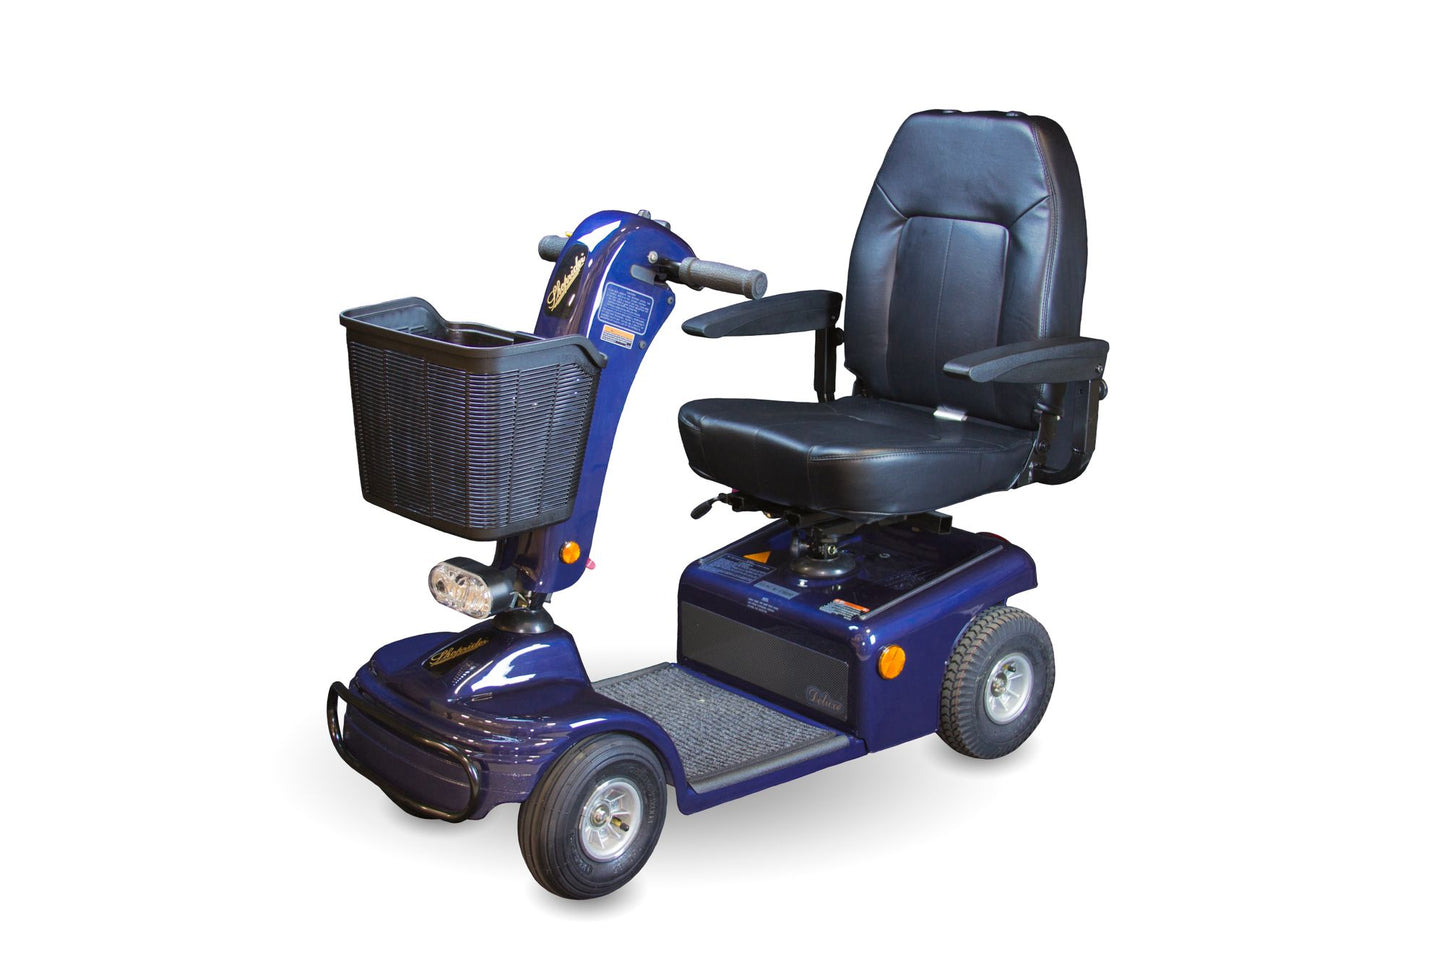 Shoprider Sunrunner 4-Wheel Extra Long Distance Mobility Scooter - All Terrain, Heavy Duty Chair, 300lbs Weight Capacity